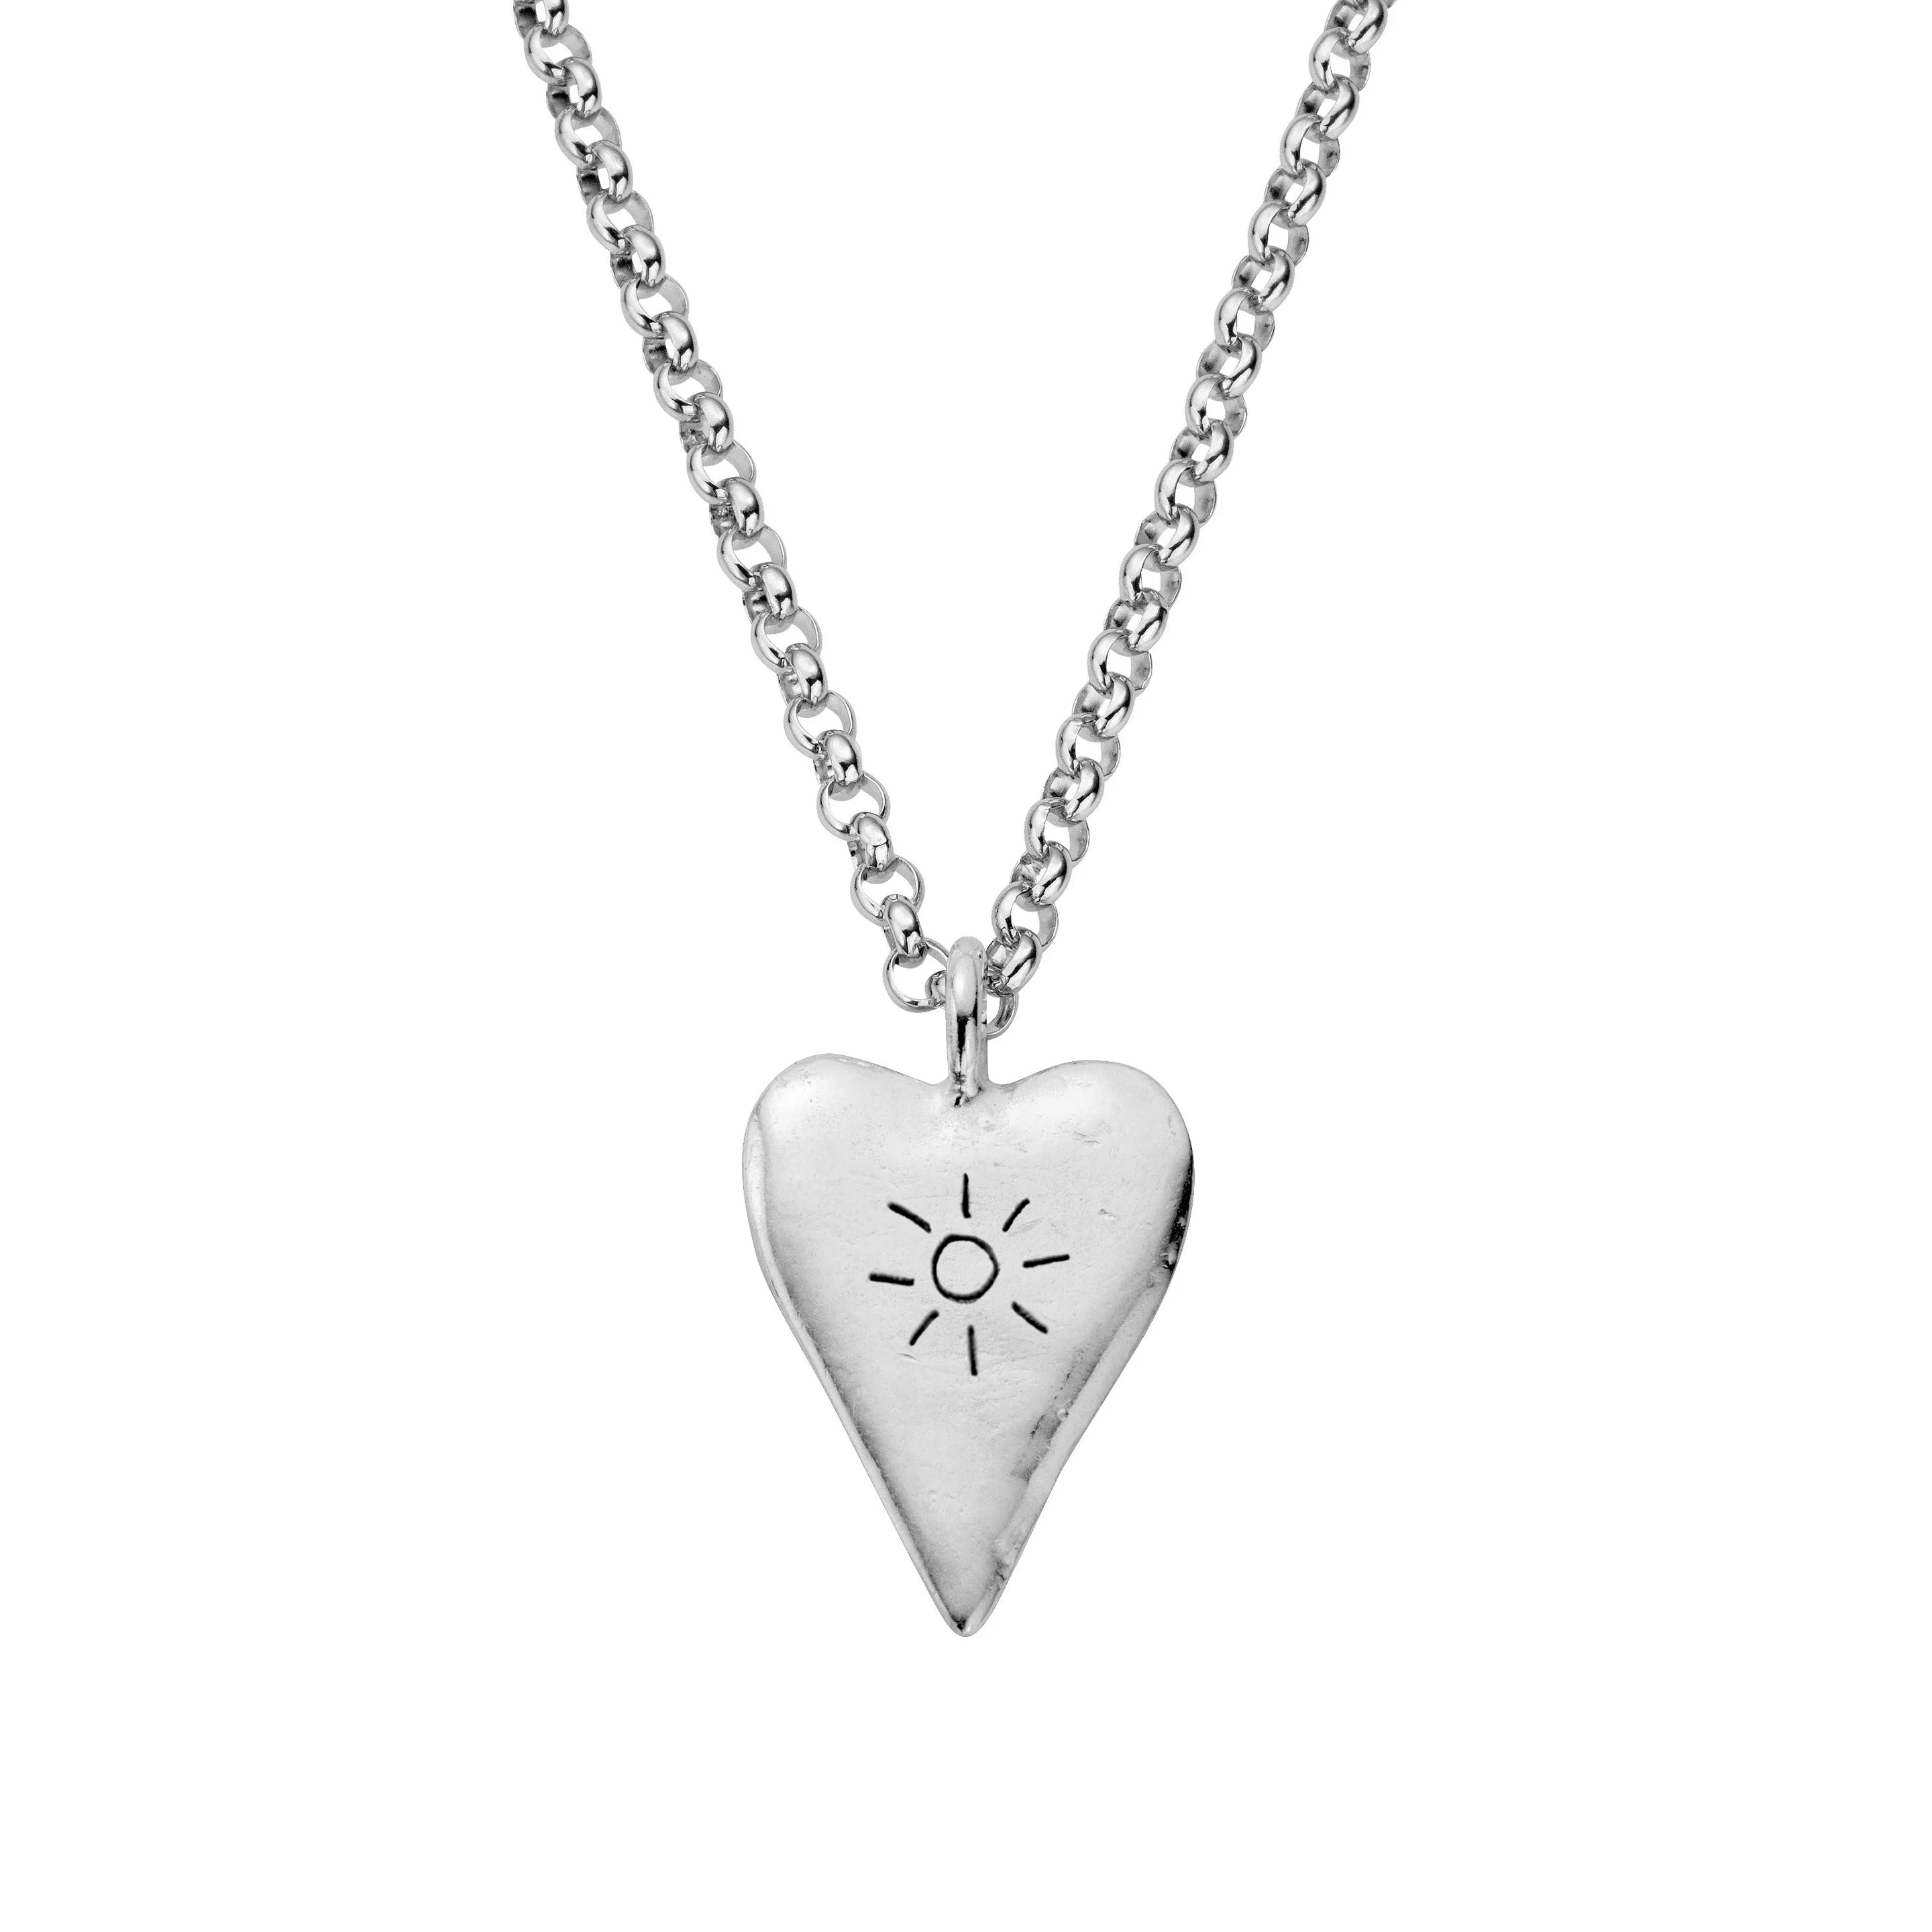 Silver Maxi Heart Necklace with Handwriting